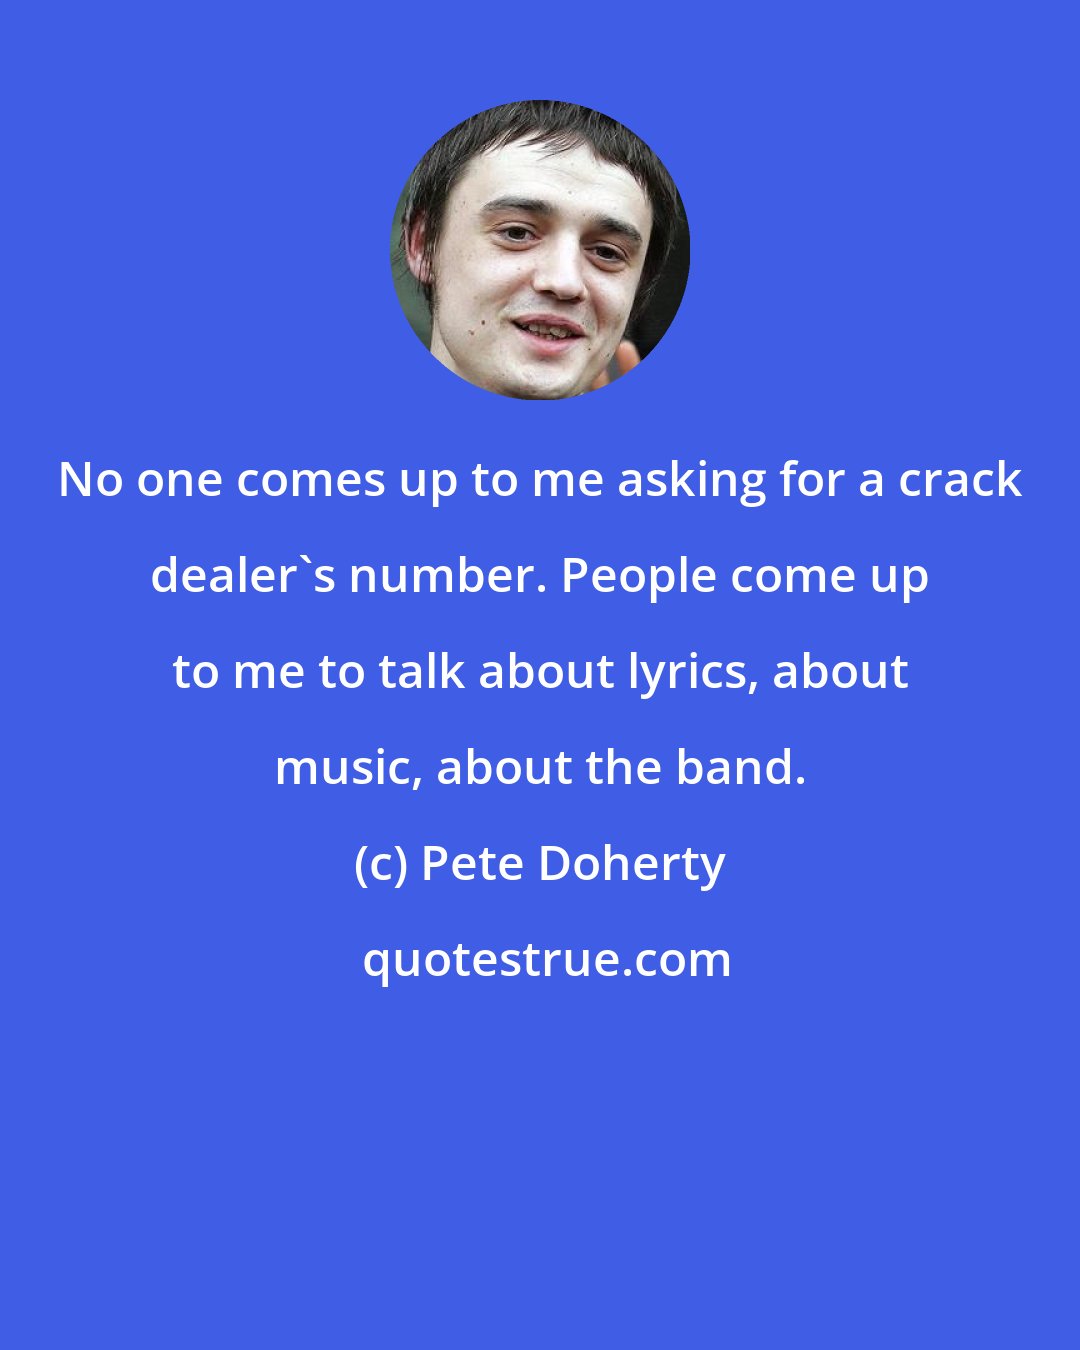 Pete Doherty: No one comes up to me asking for a crack dealer's number. People come up to me to talk about lyrics, about music, about the band.